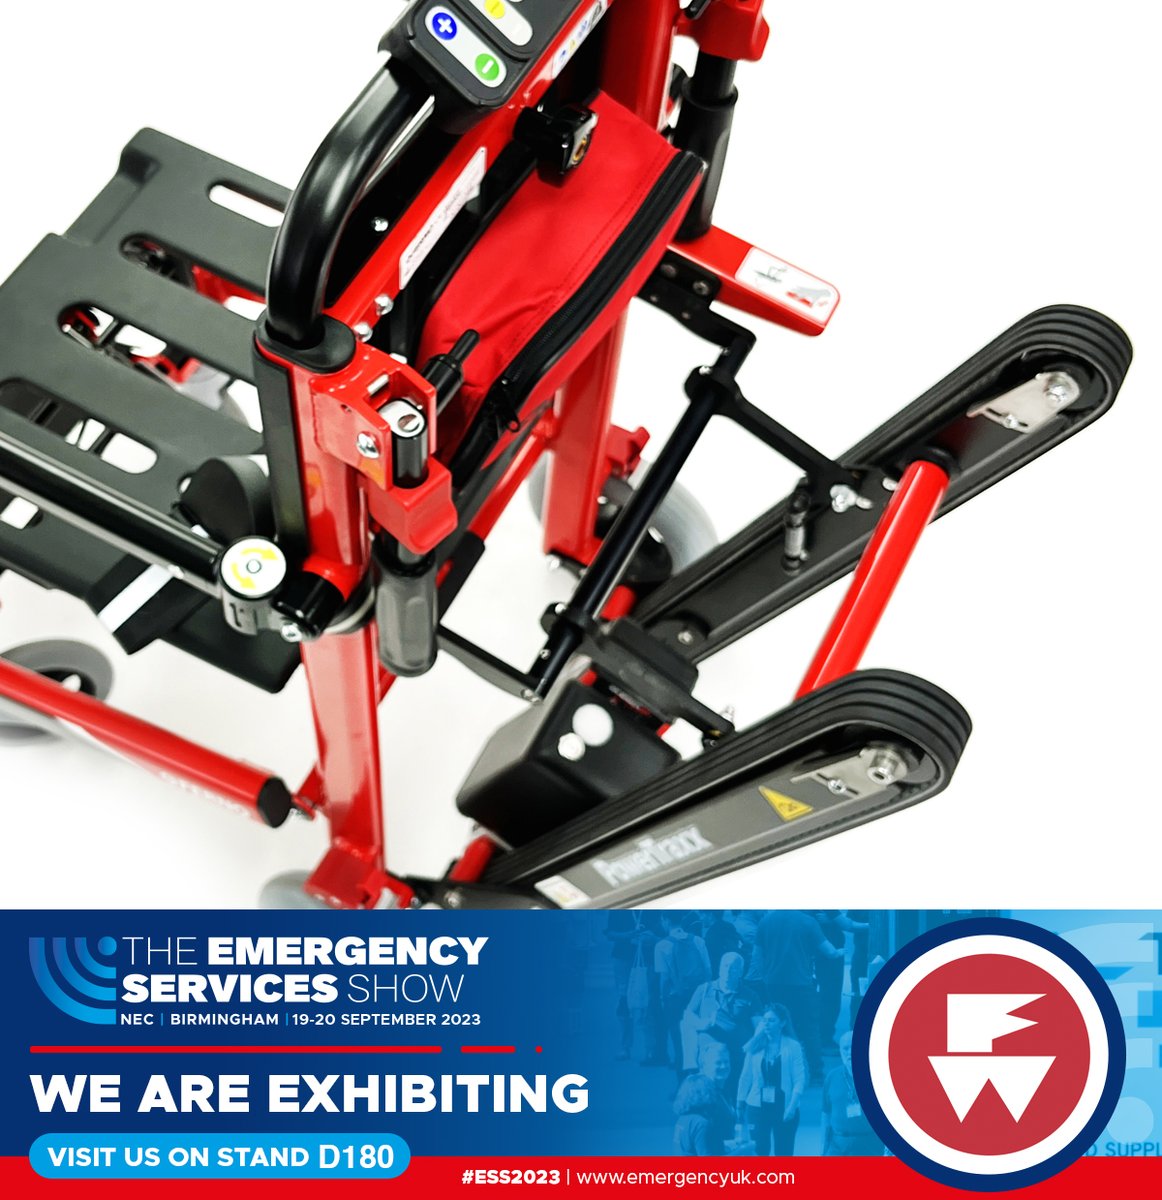 On Track for #ESS23 we hope to see you there so we can DEMO the Venice PowerTraxx Chair, which is extensively used by the NHS Ambulance Trusts